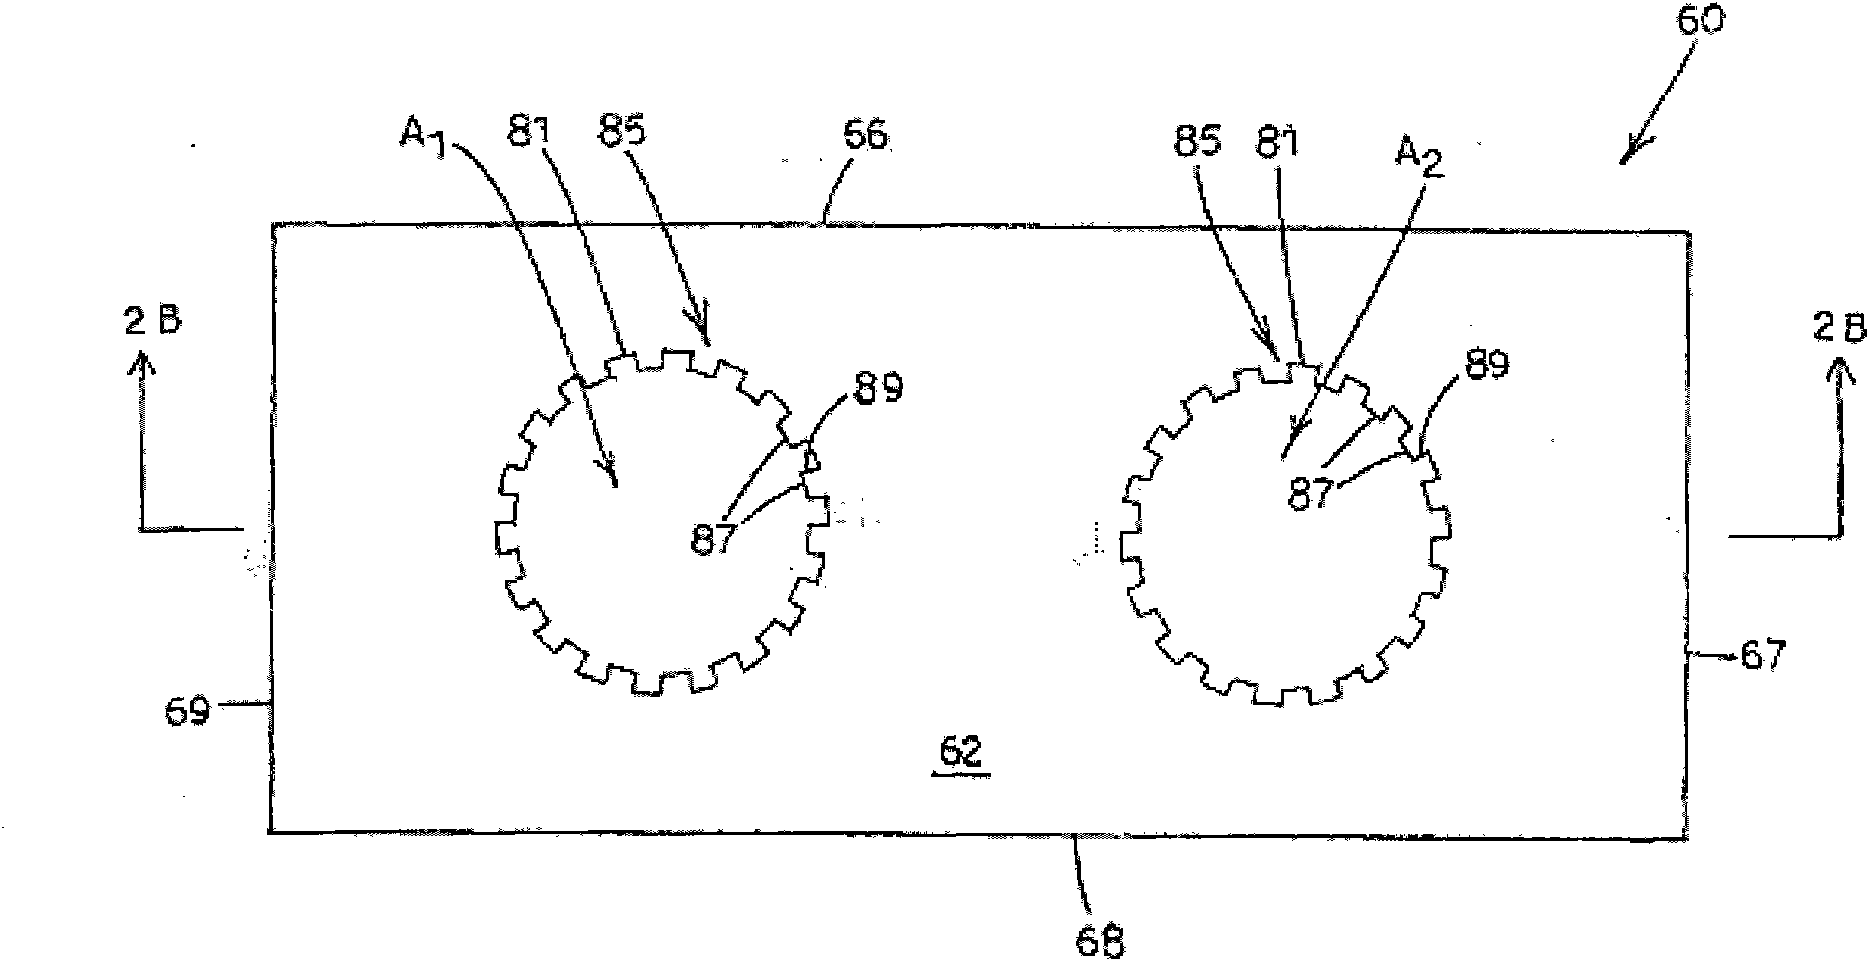 Anti-unscrewing and multi-angular fastening apparatuses and methods for surgical bone screw/plate systems